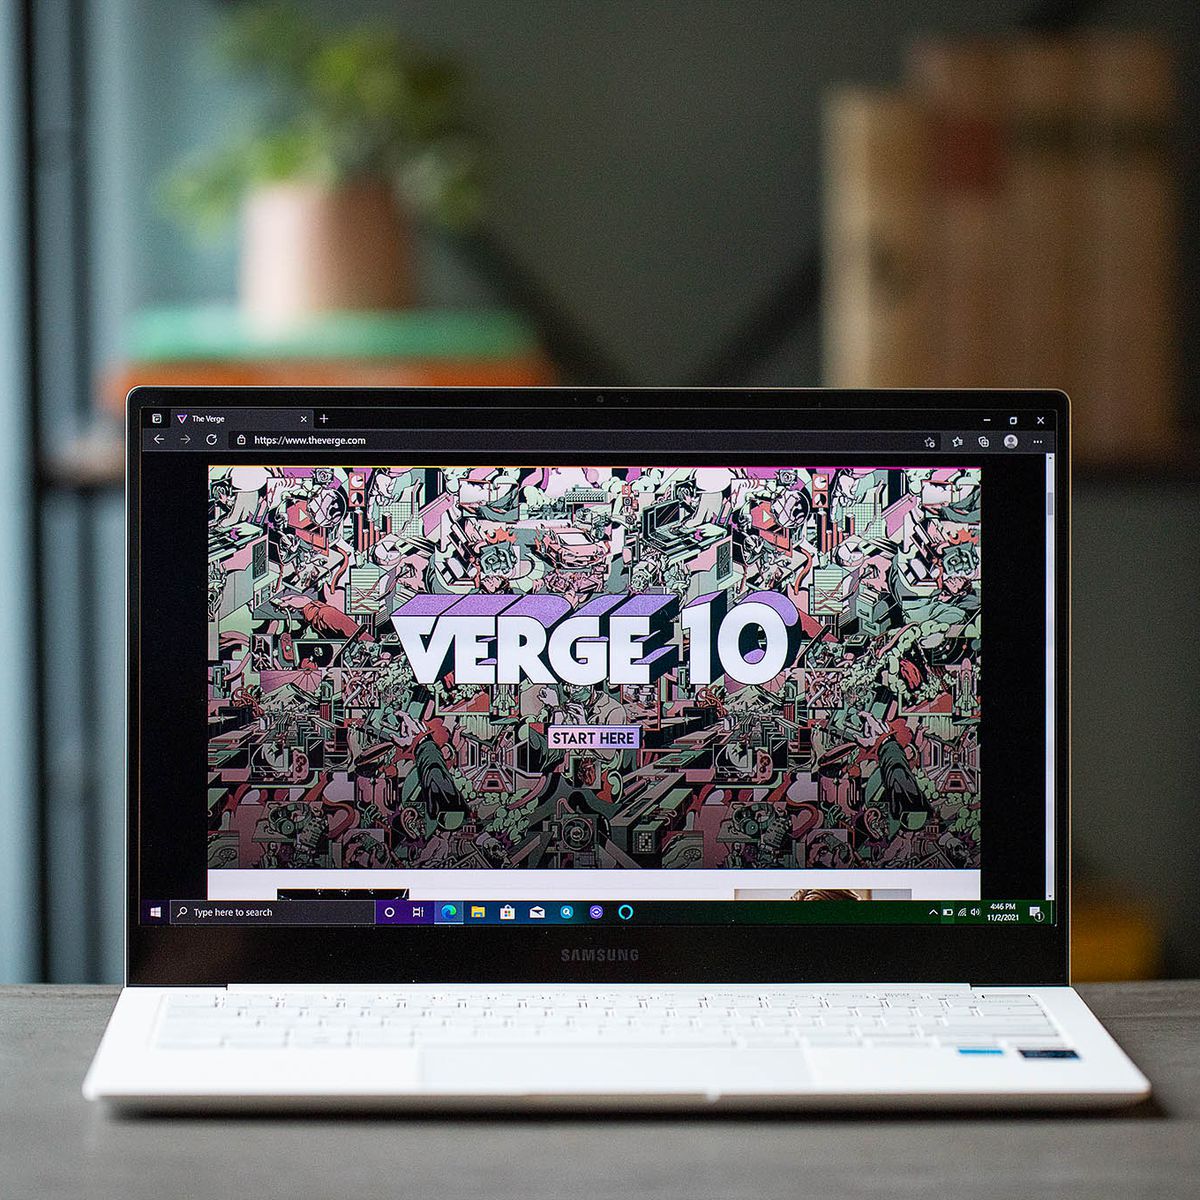 The Samsung Galaxy Book Pro opens and displays the Verge 10 image.